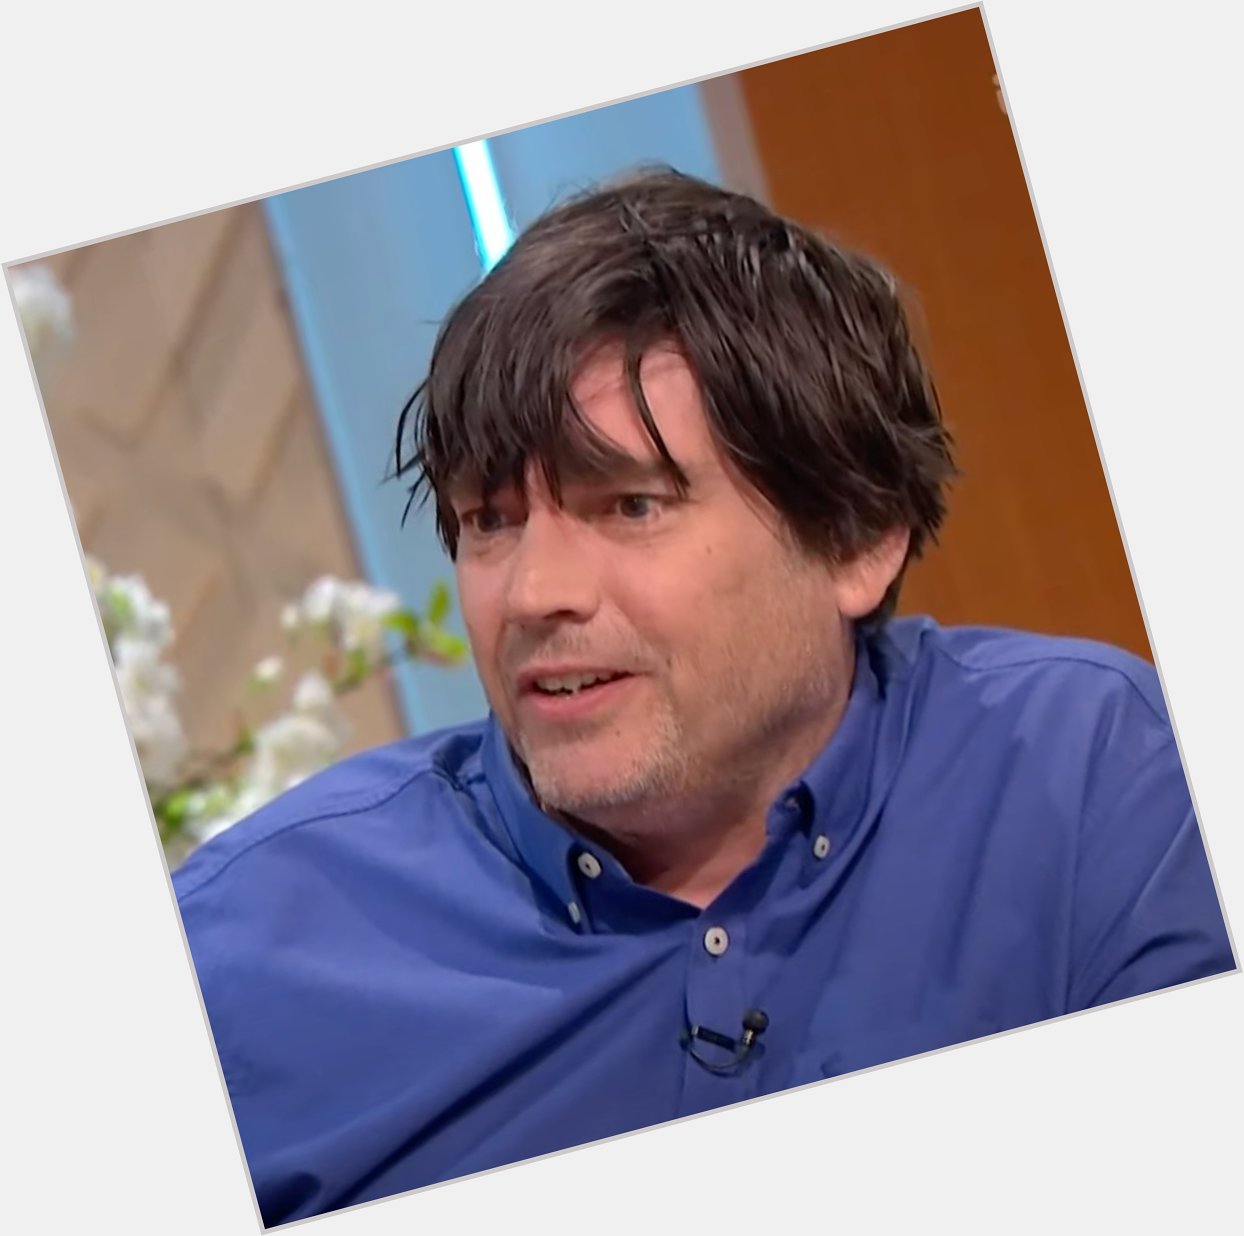 Happy 53rd birthday to pop s most famous cheesemaker, Alex James of Blur. 